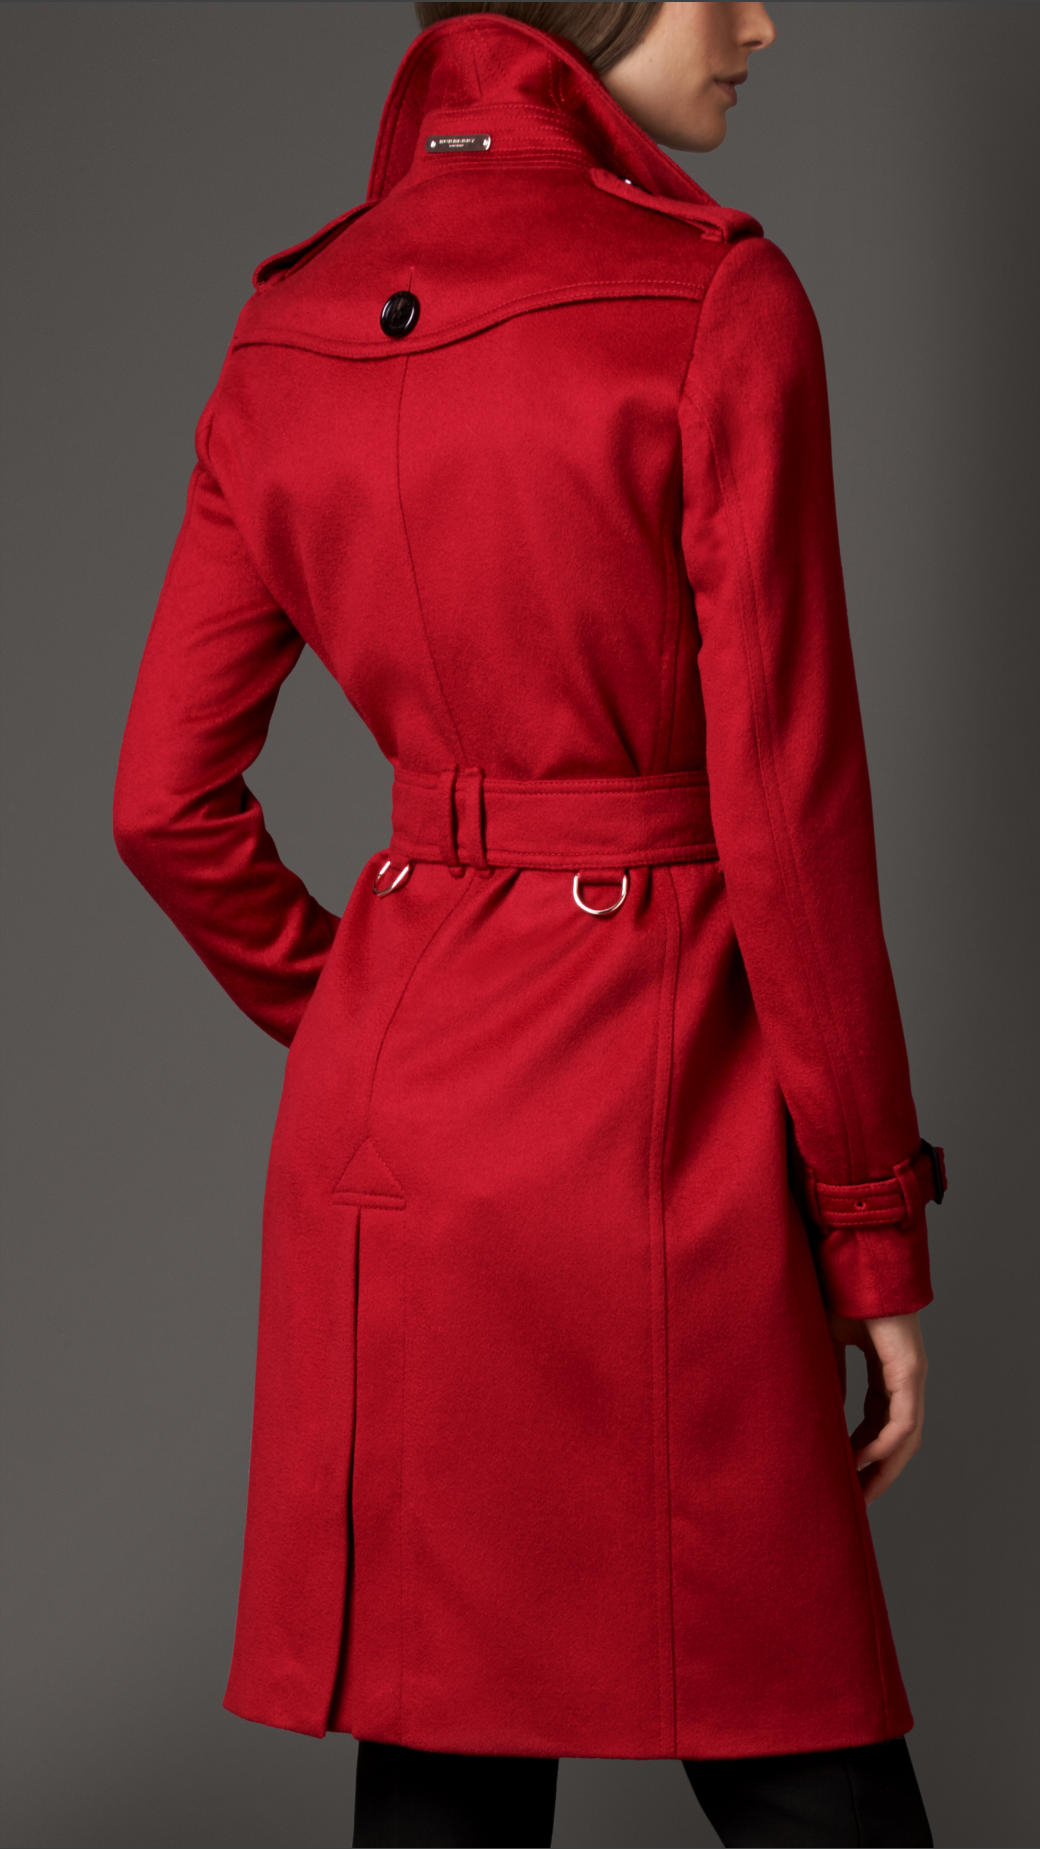 Lyst - Burberry Cashmere Trench Coat in Red